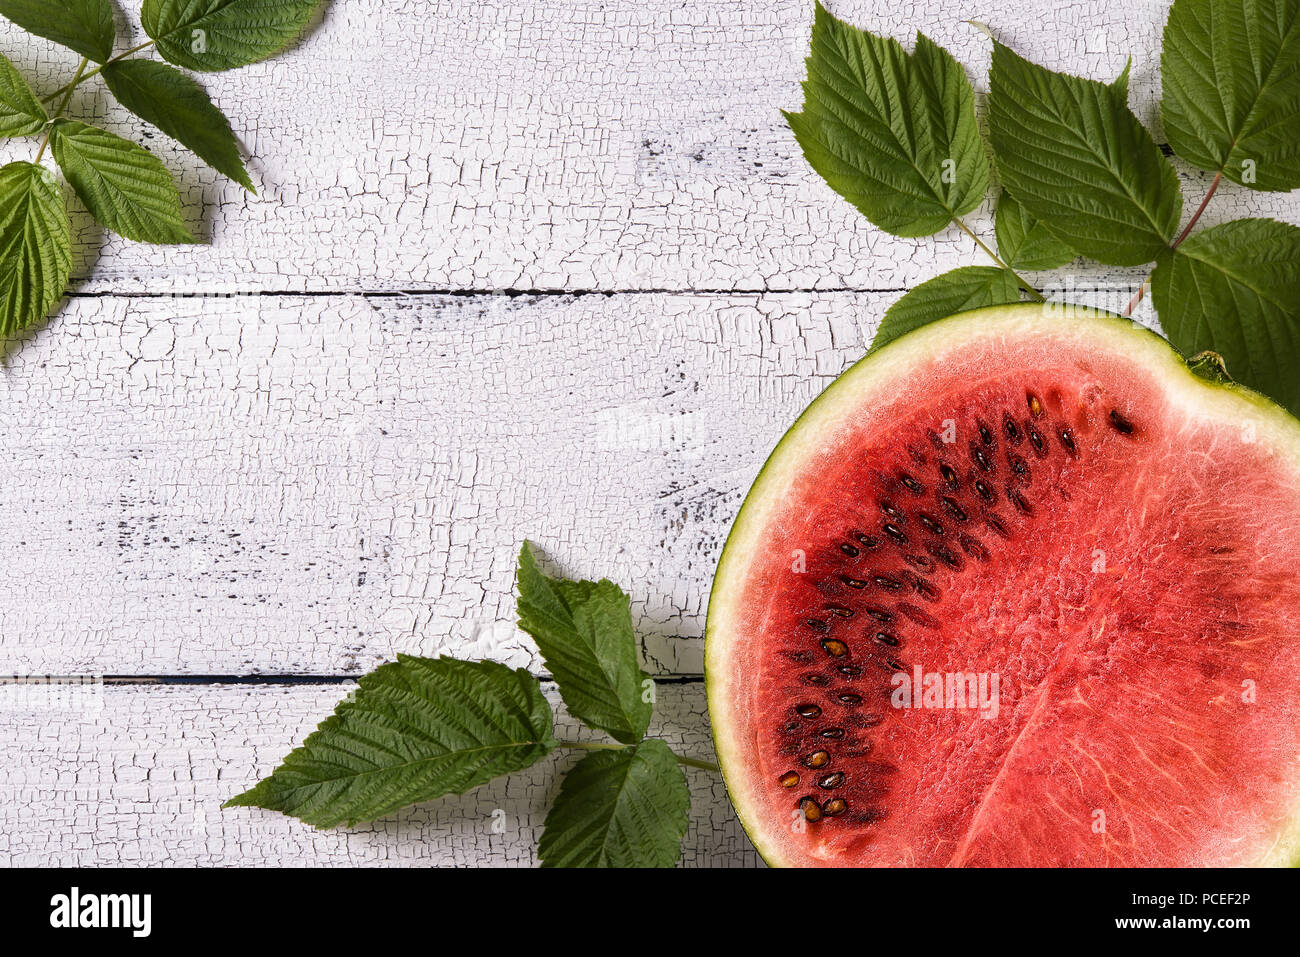 Cutted ripe red watermelon decorated with green leaves and on old white wooden table surface with cracks. Healthy eating and autumn harvest concepts.  Stock Photo